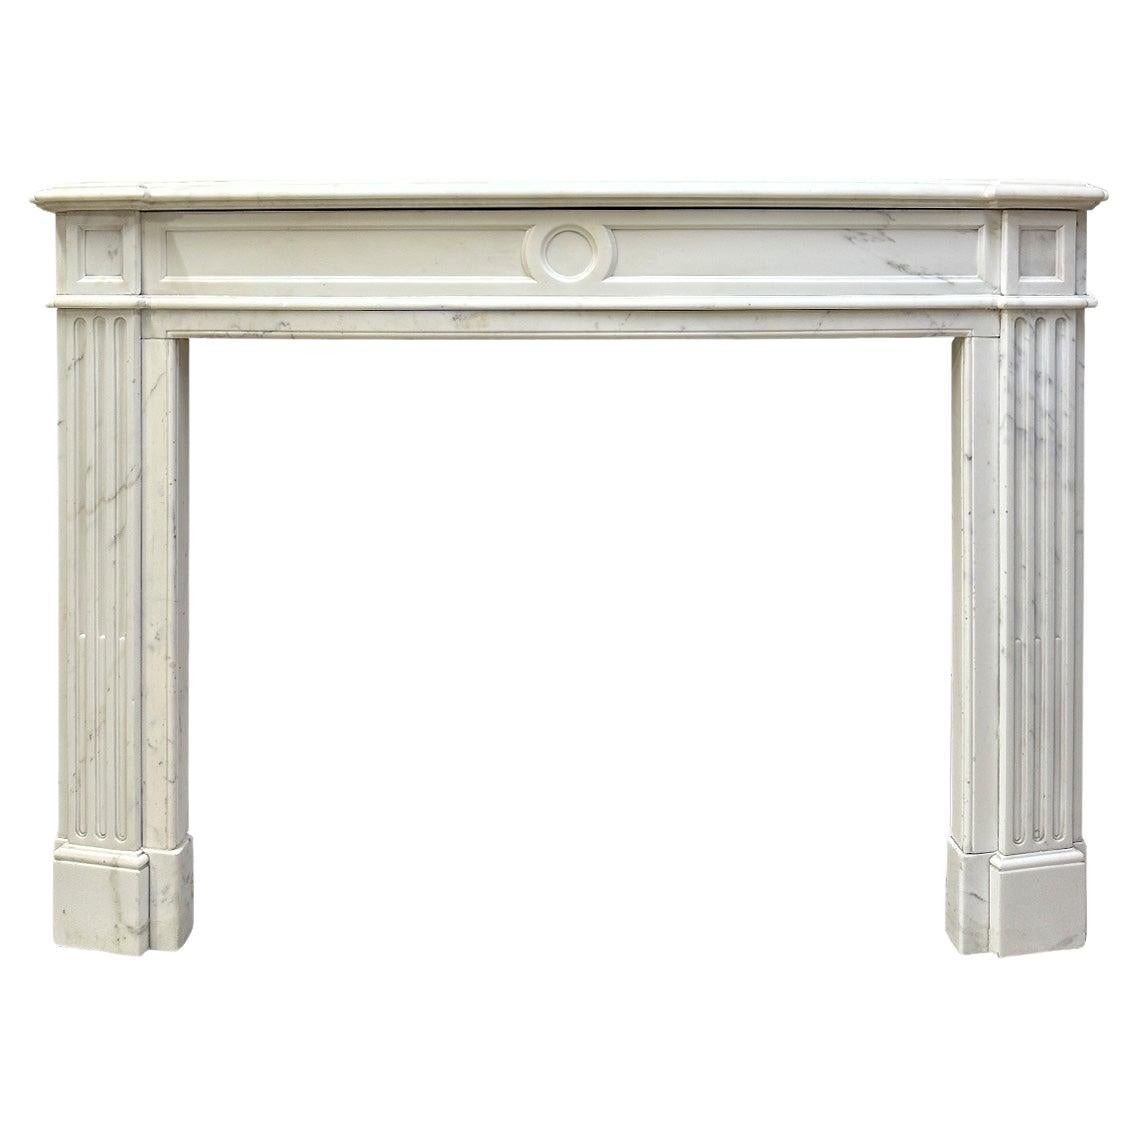 An Antique French Statuary White Marble Louis XVI Style Fireplace mantel